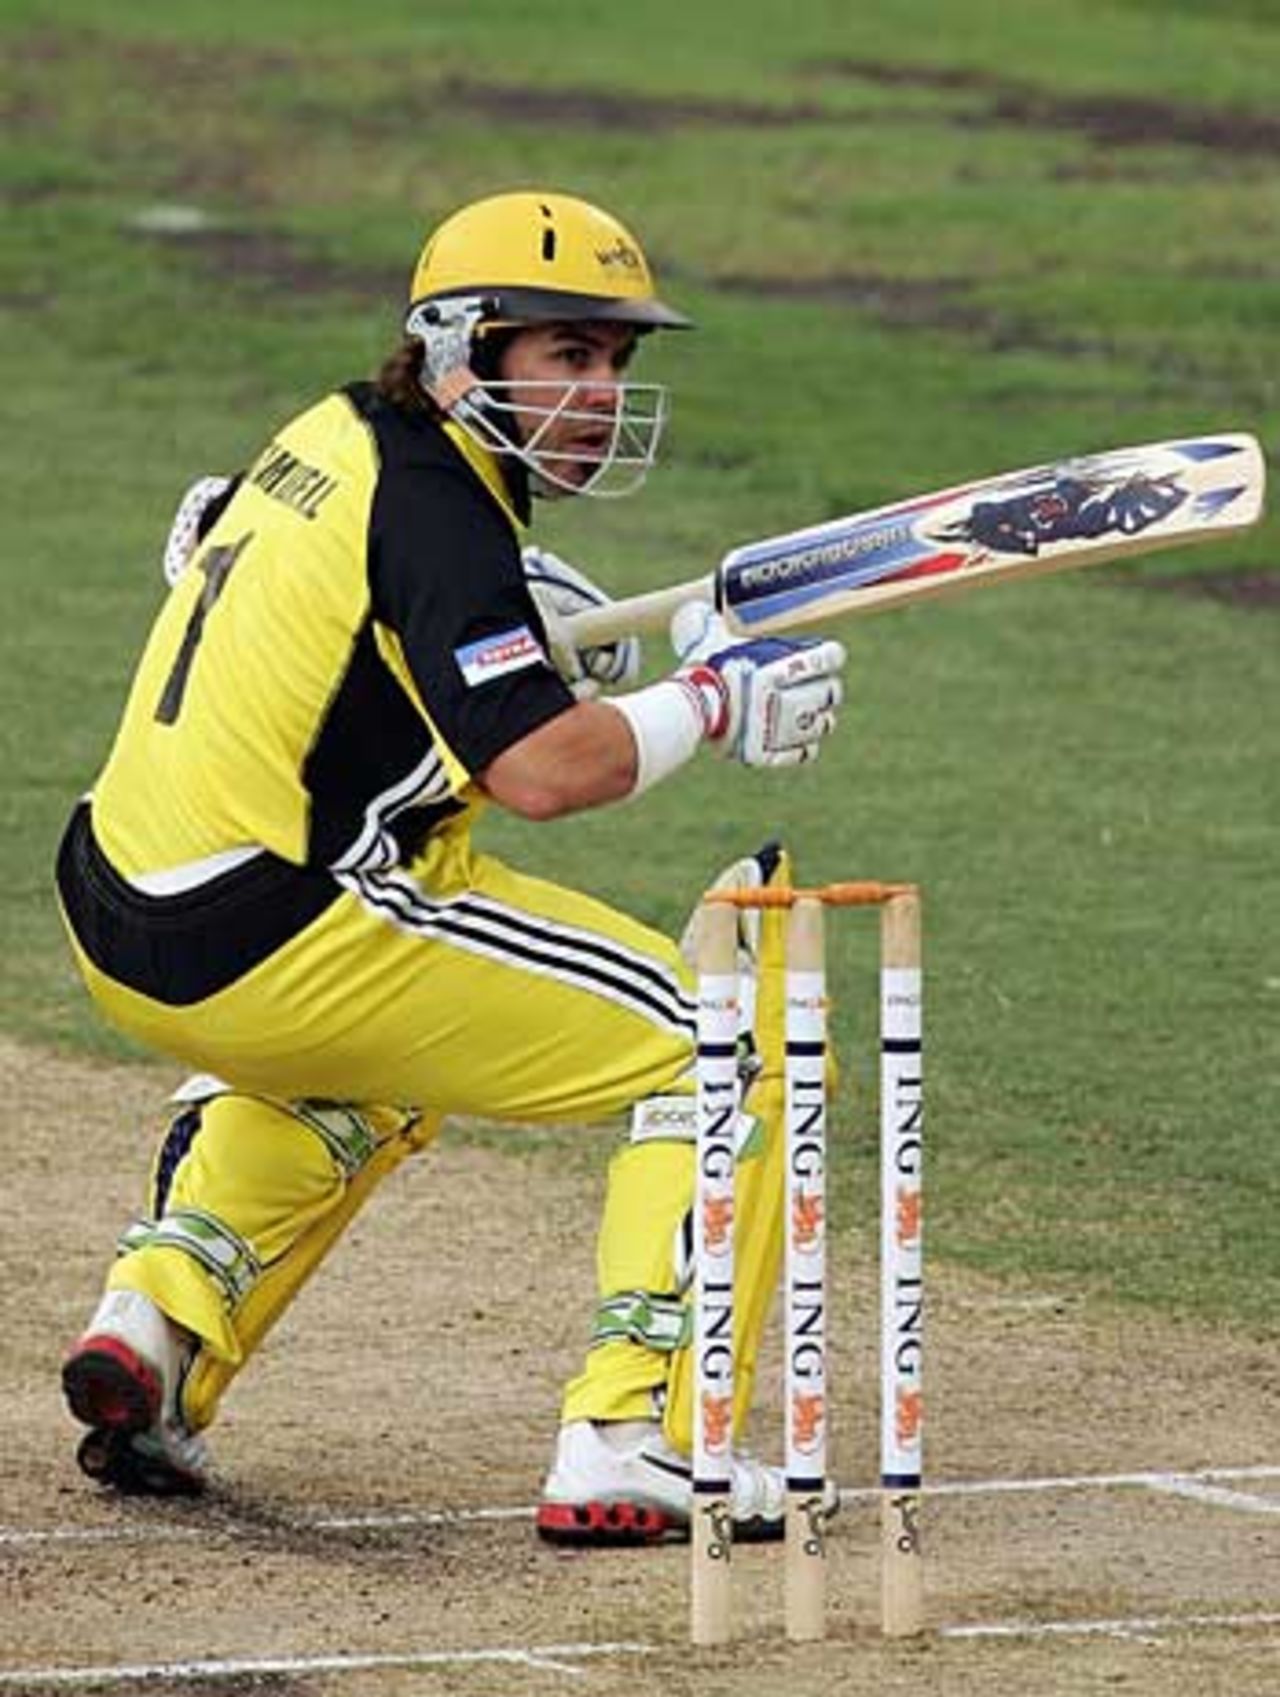 Ryan Campbell struck 41 in his final one-day match to give WA a flying start to their run chase, Western Australia v Queensland, ING Cup, Perth, January 13, 2006